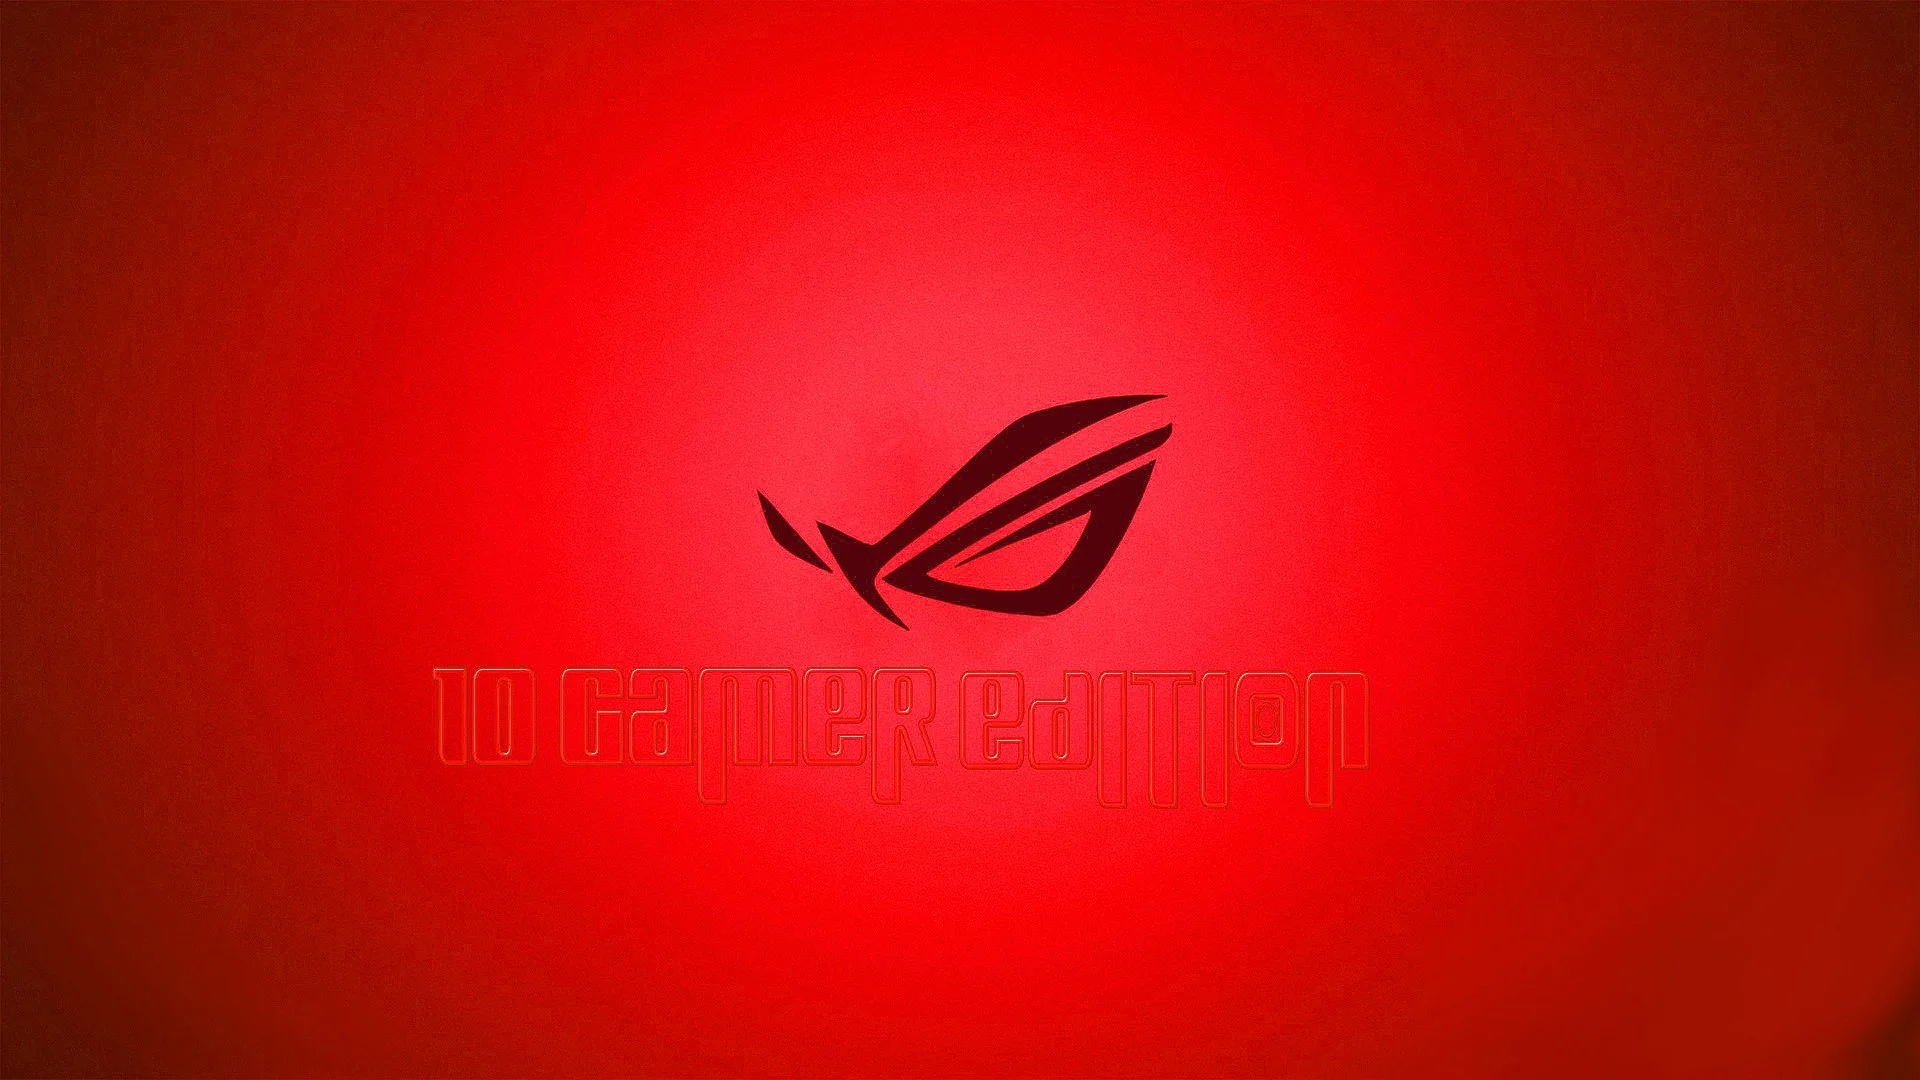 Here's the COOL Red Wallpaper Everybody …